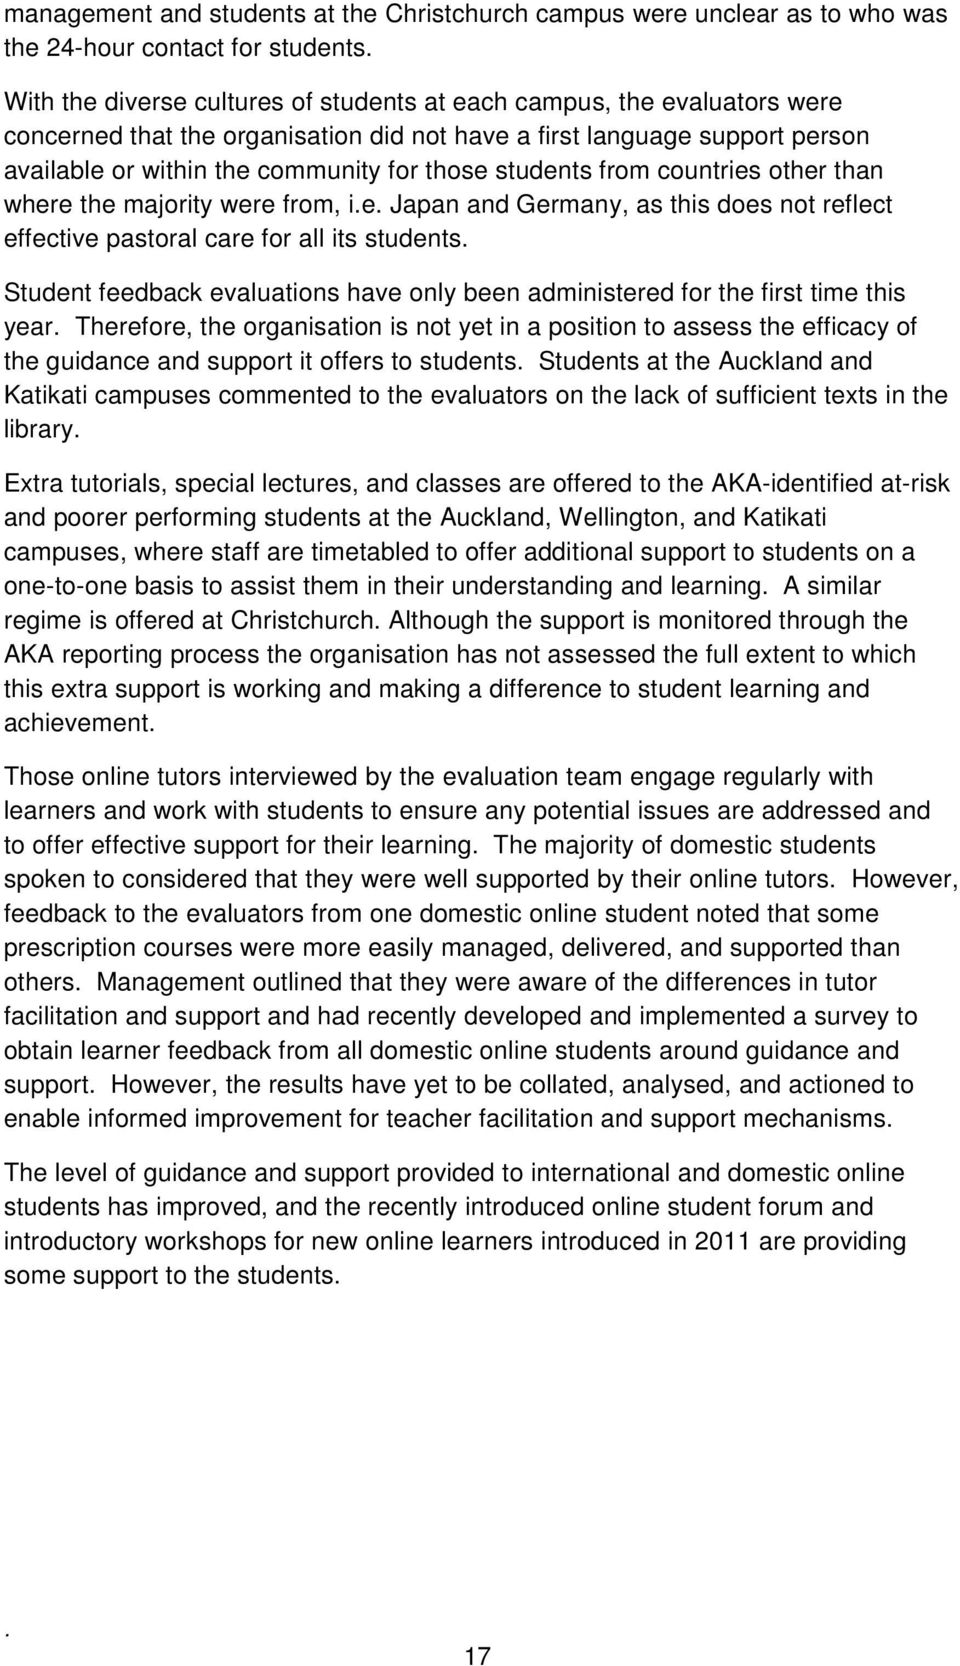 this does not reflect effective pastoral care for all its students Student feedback evaluations have only been administered for the first time this year Therefore, the organisation is not yet in a